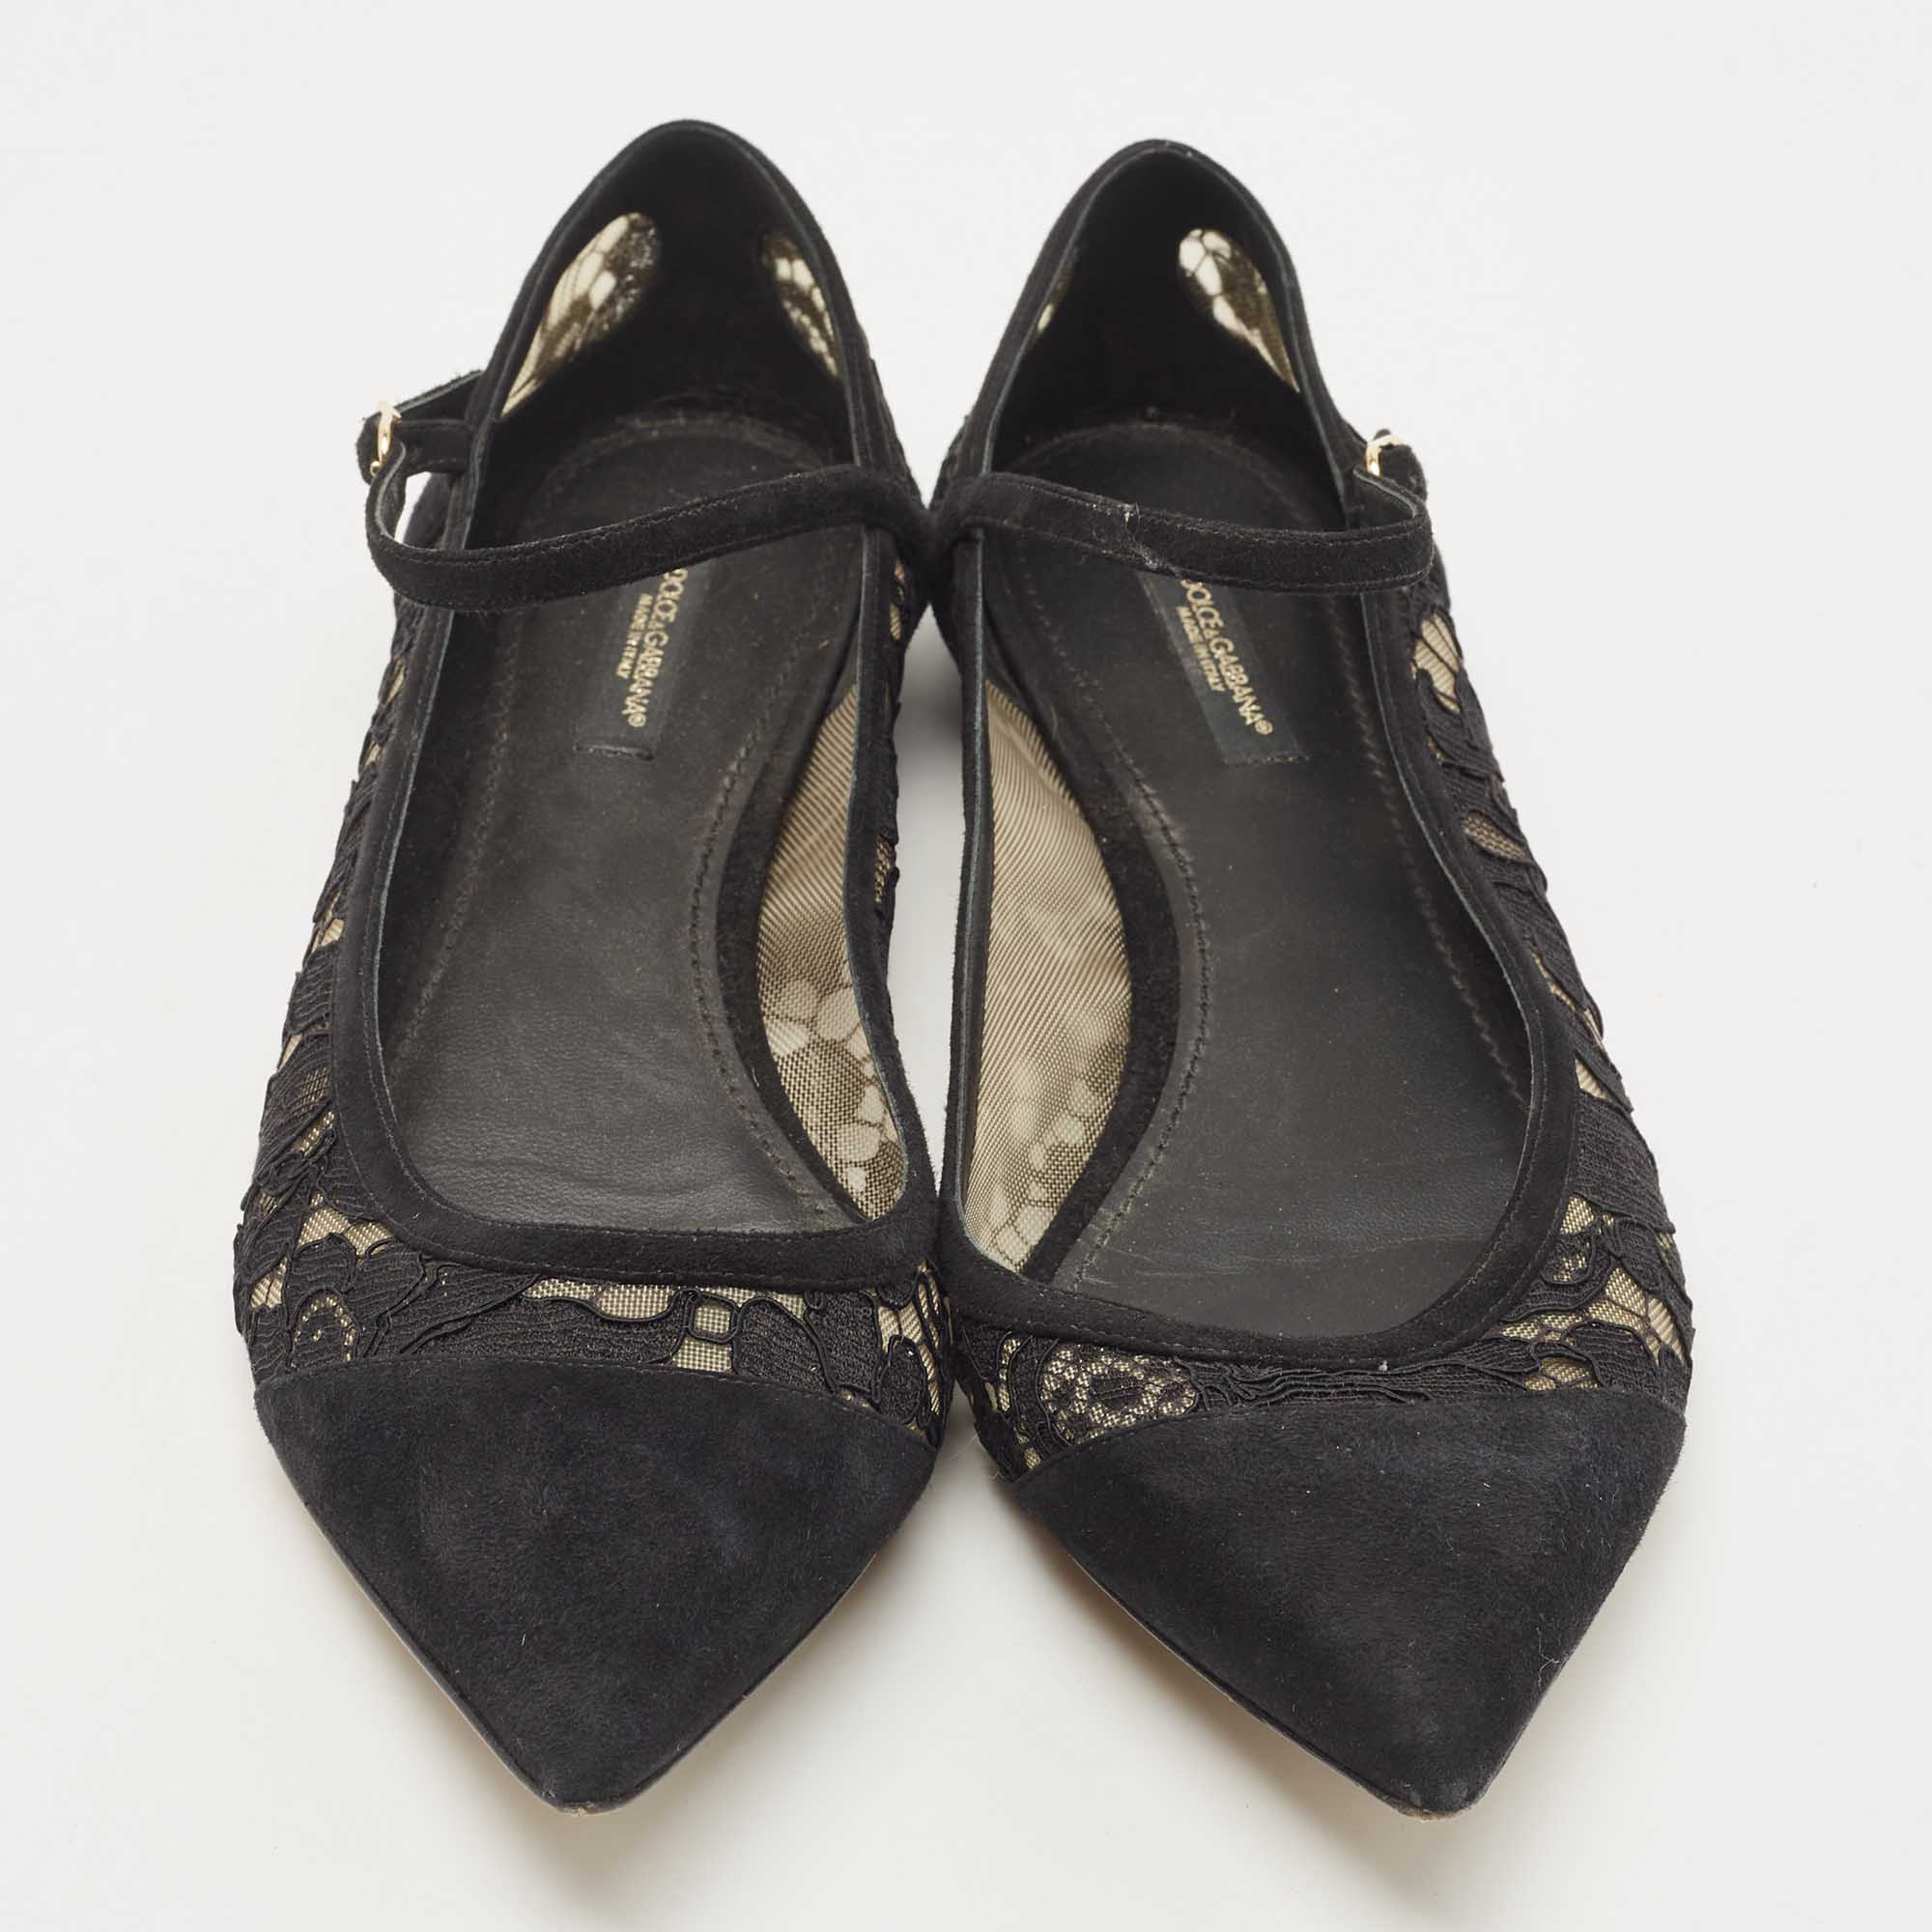 Dolce & Gabbana Black Suede And Lace Mary Jane Ballet Flats Size 40